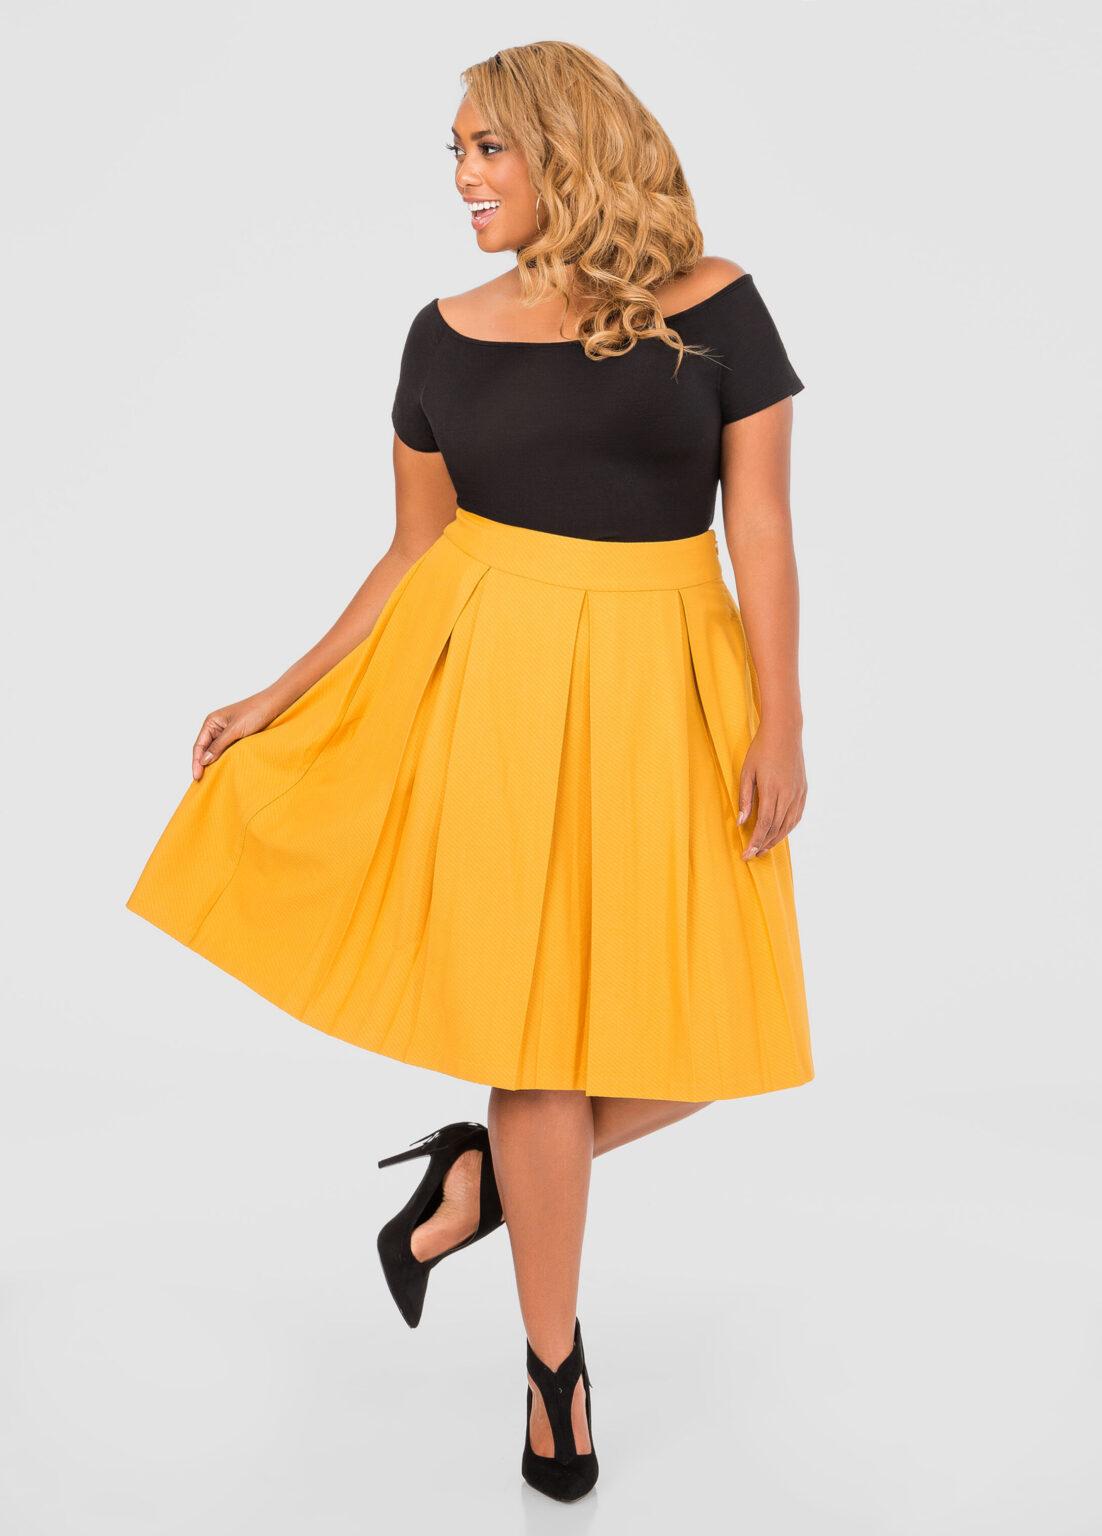 Can plus size women wear pleated skirts? Top 10 questions